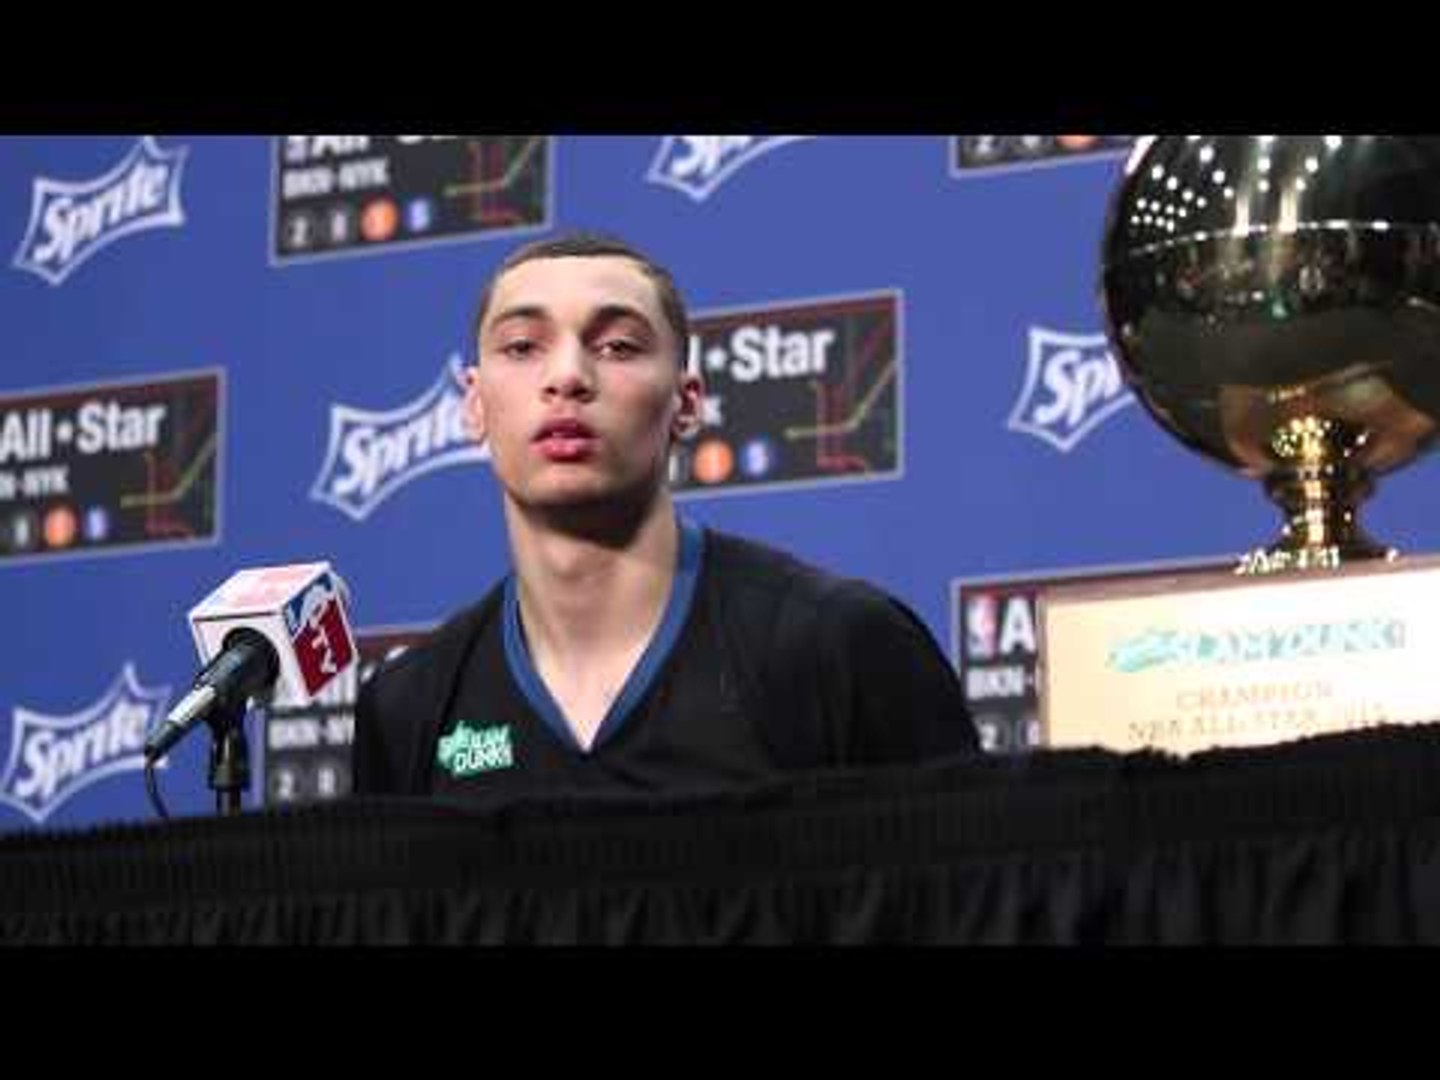 Wolves' Zach LaVine out of dunk contest at NBA All-Star weekend – The  Denver Post